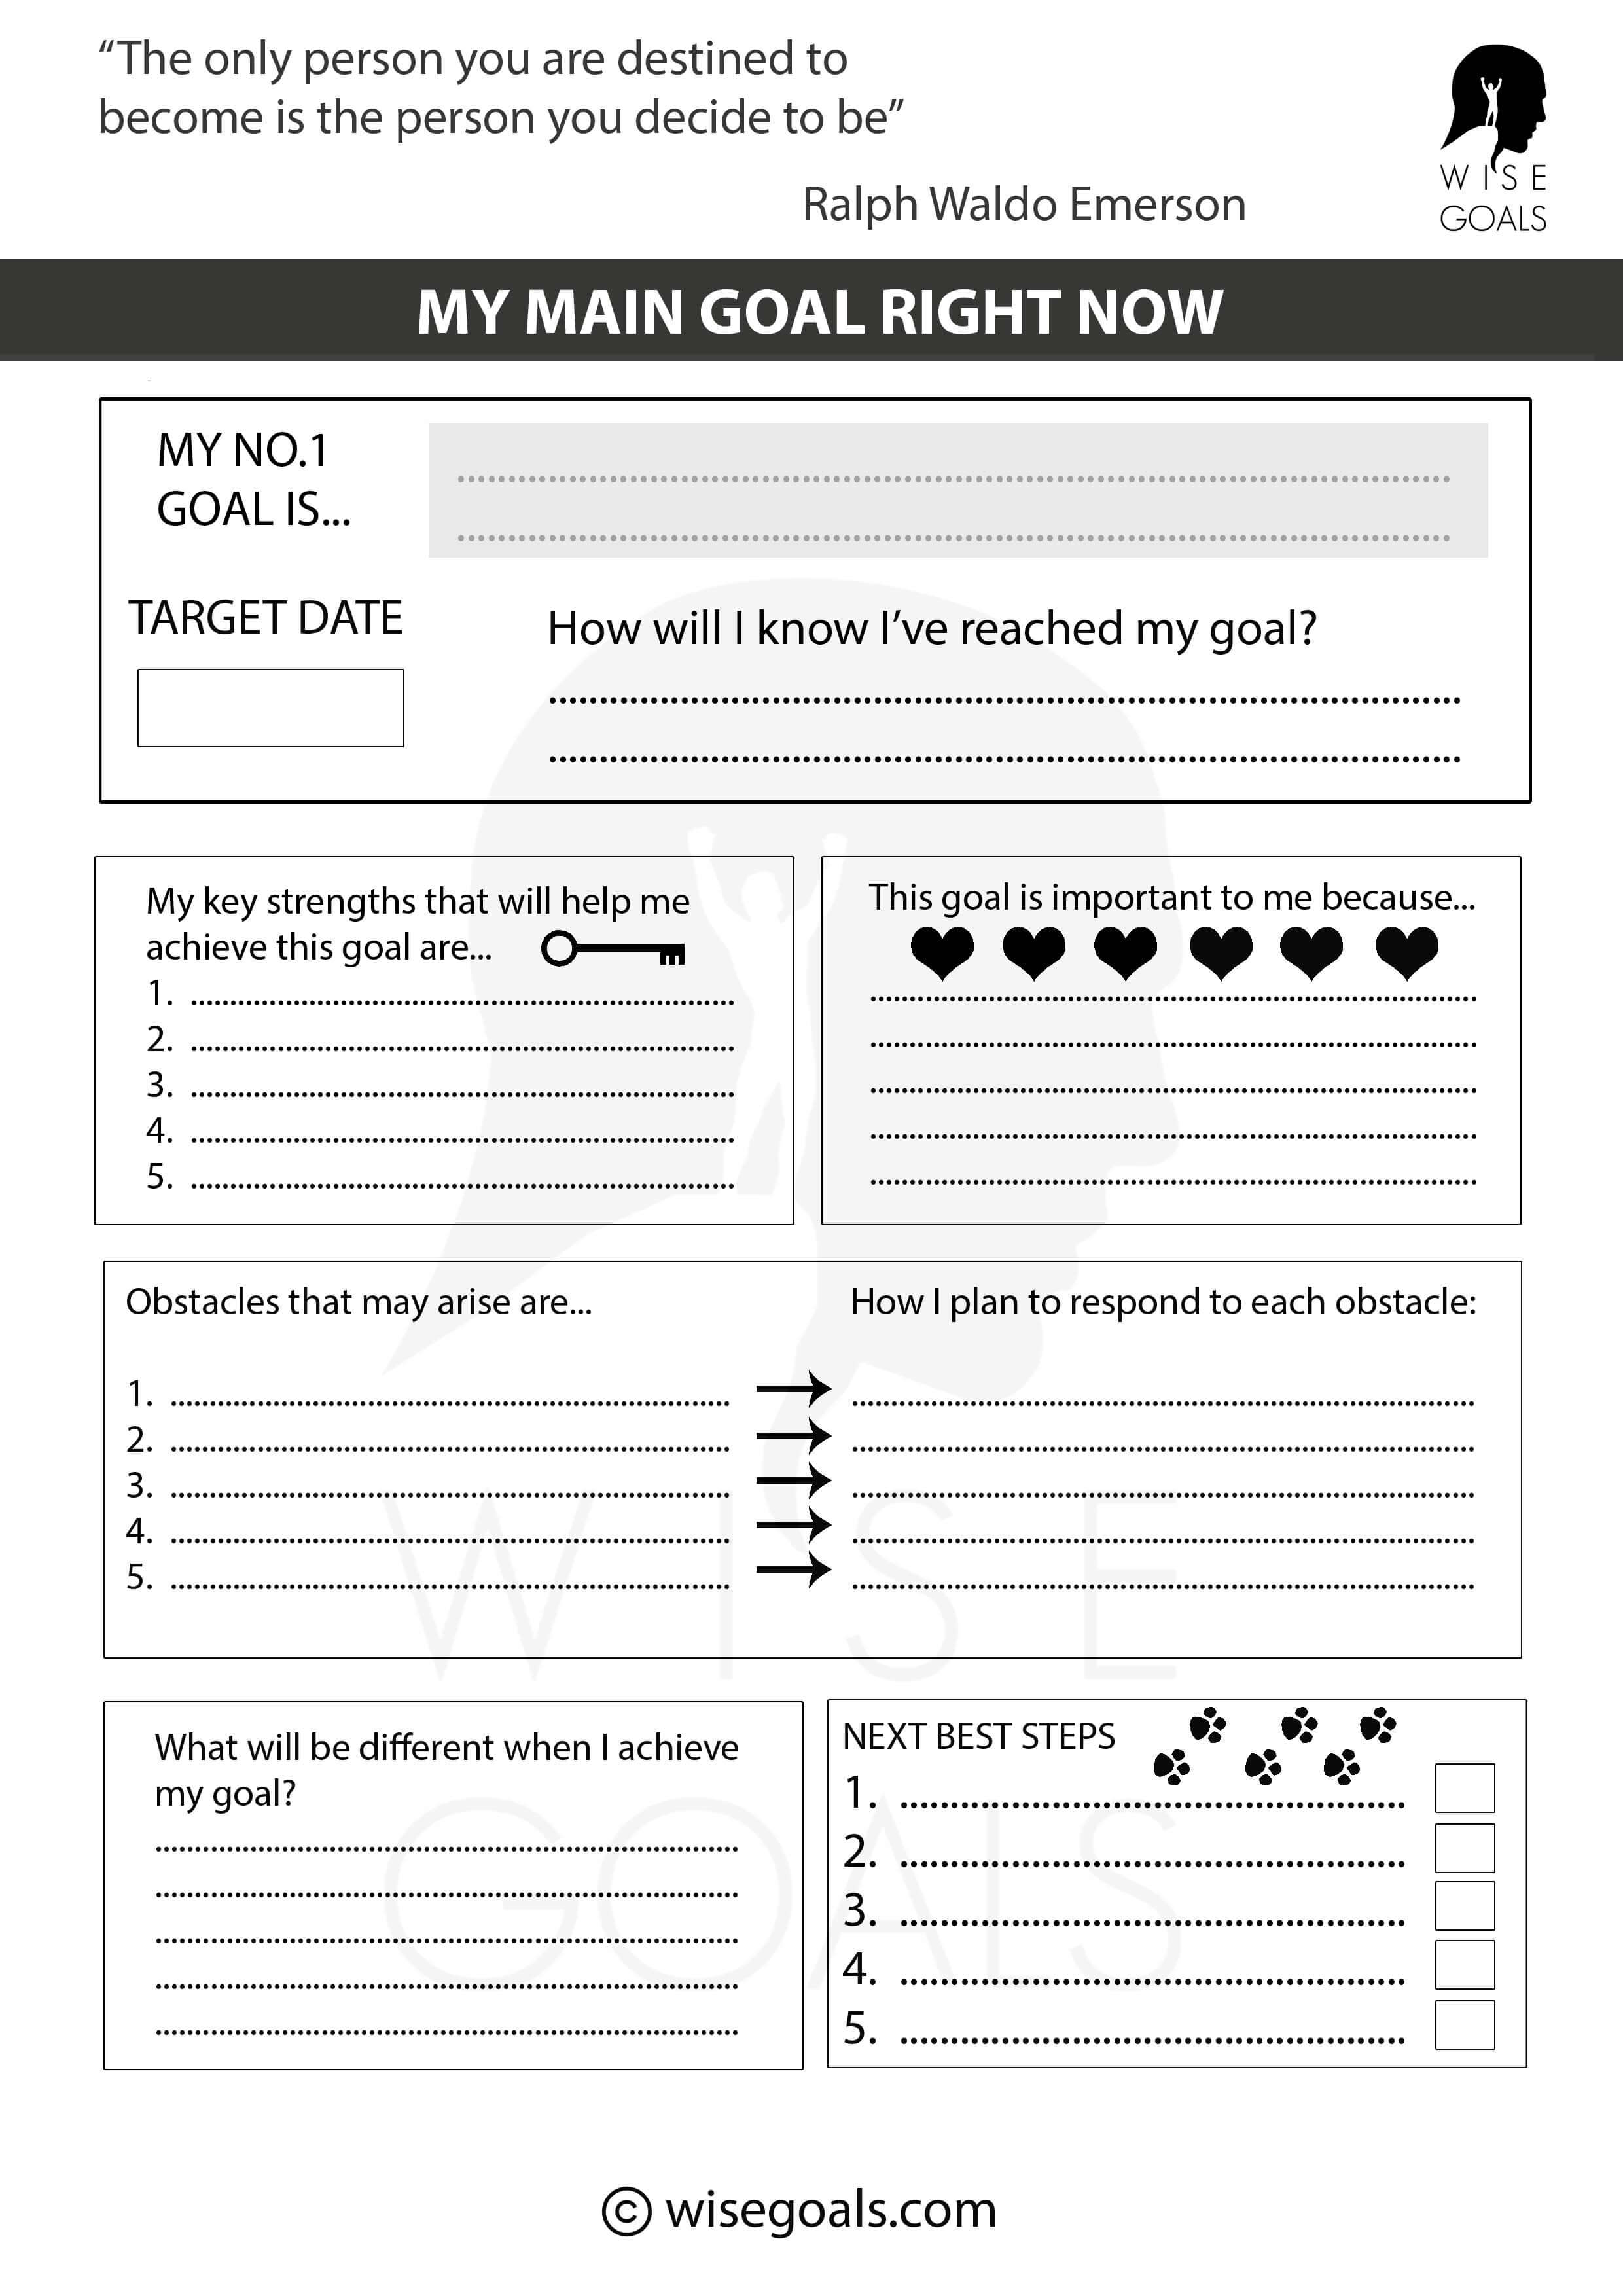 The main goal right now worksheet